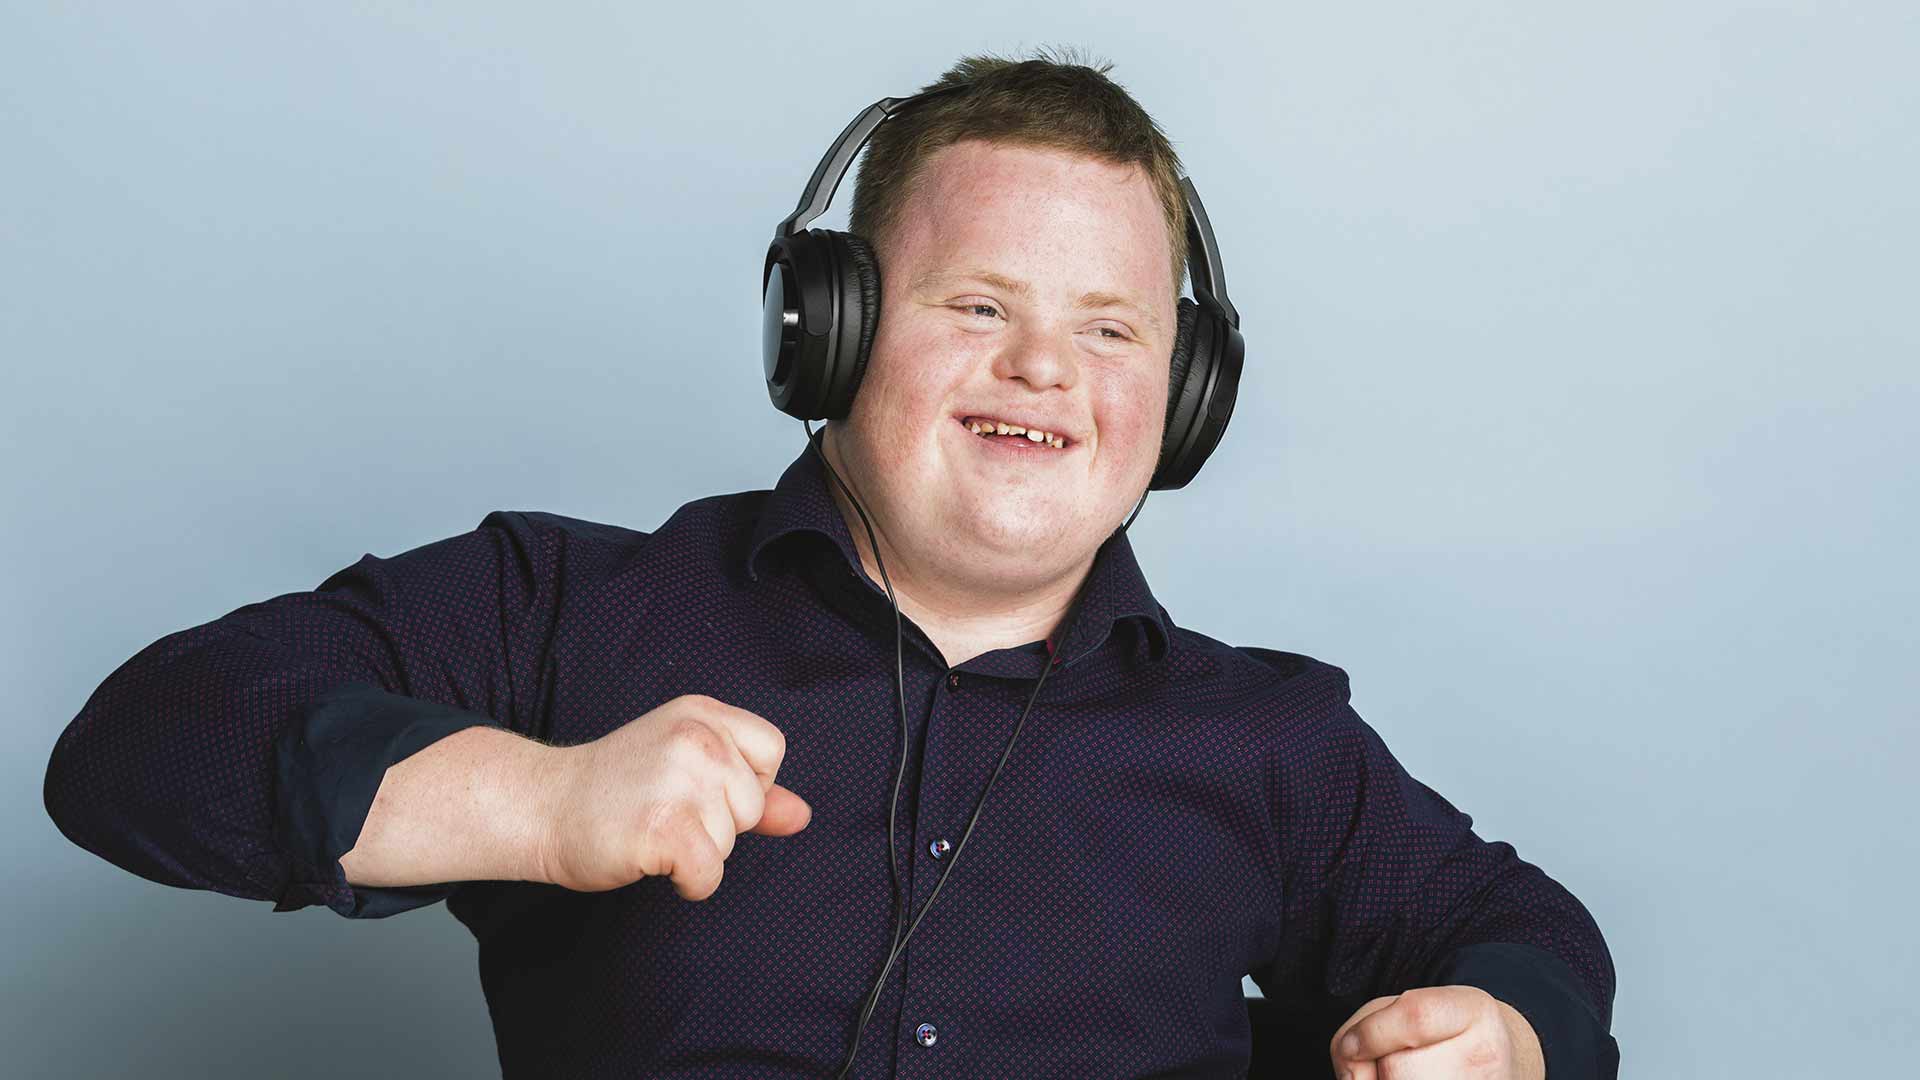 A young man with downs syndrome dances in front of a blue wall with headphones on